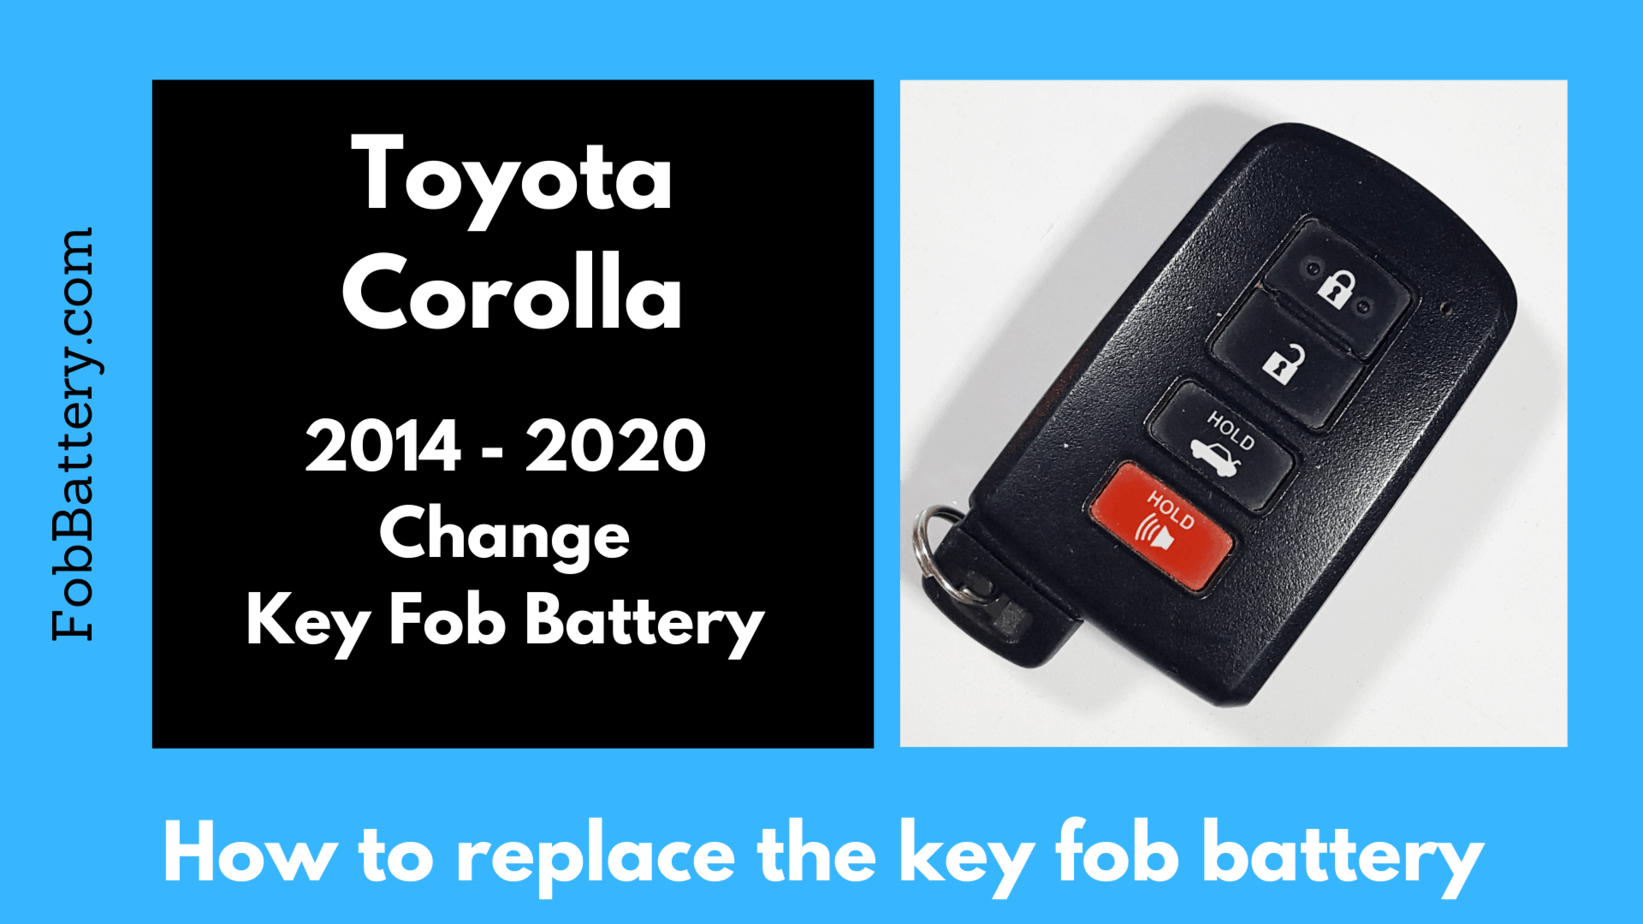 Toyota corolla key fob battery replacement